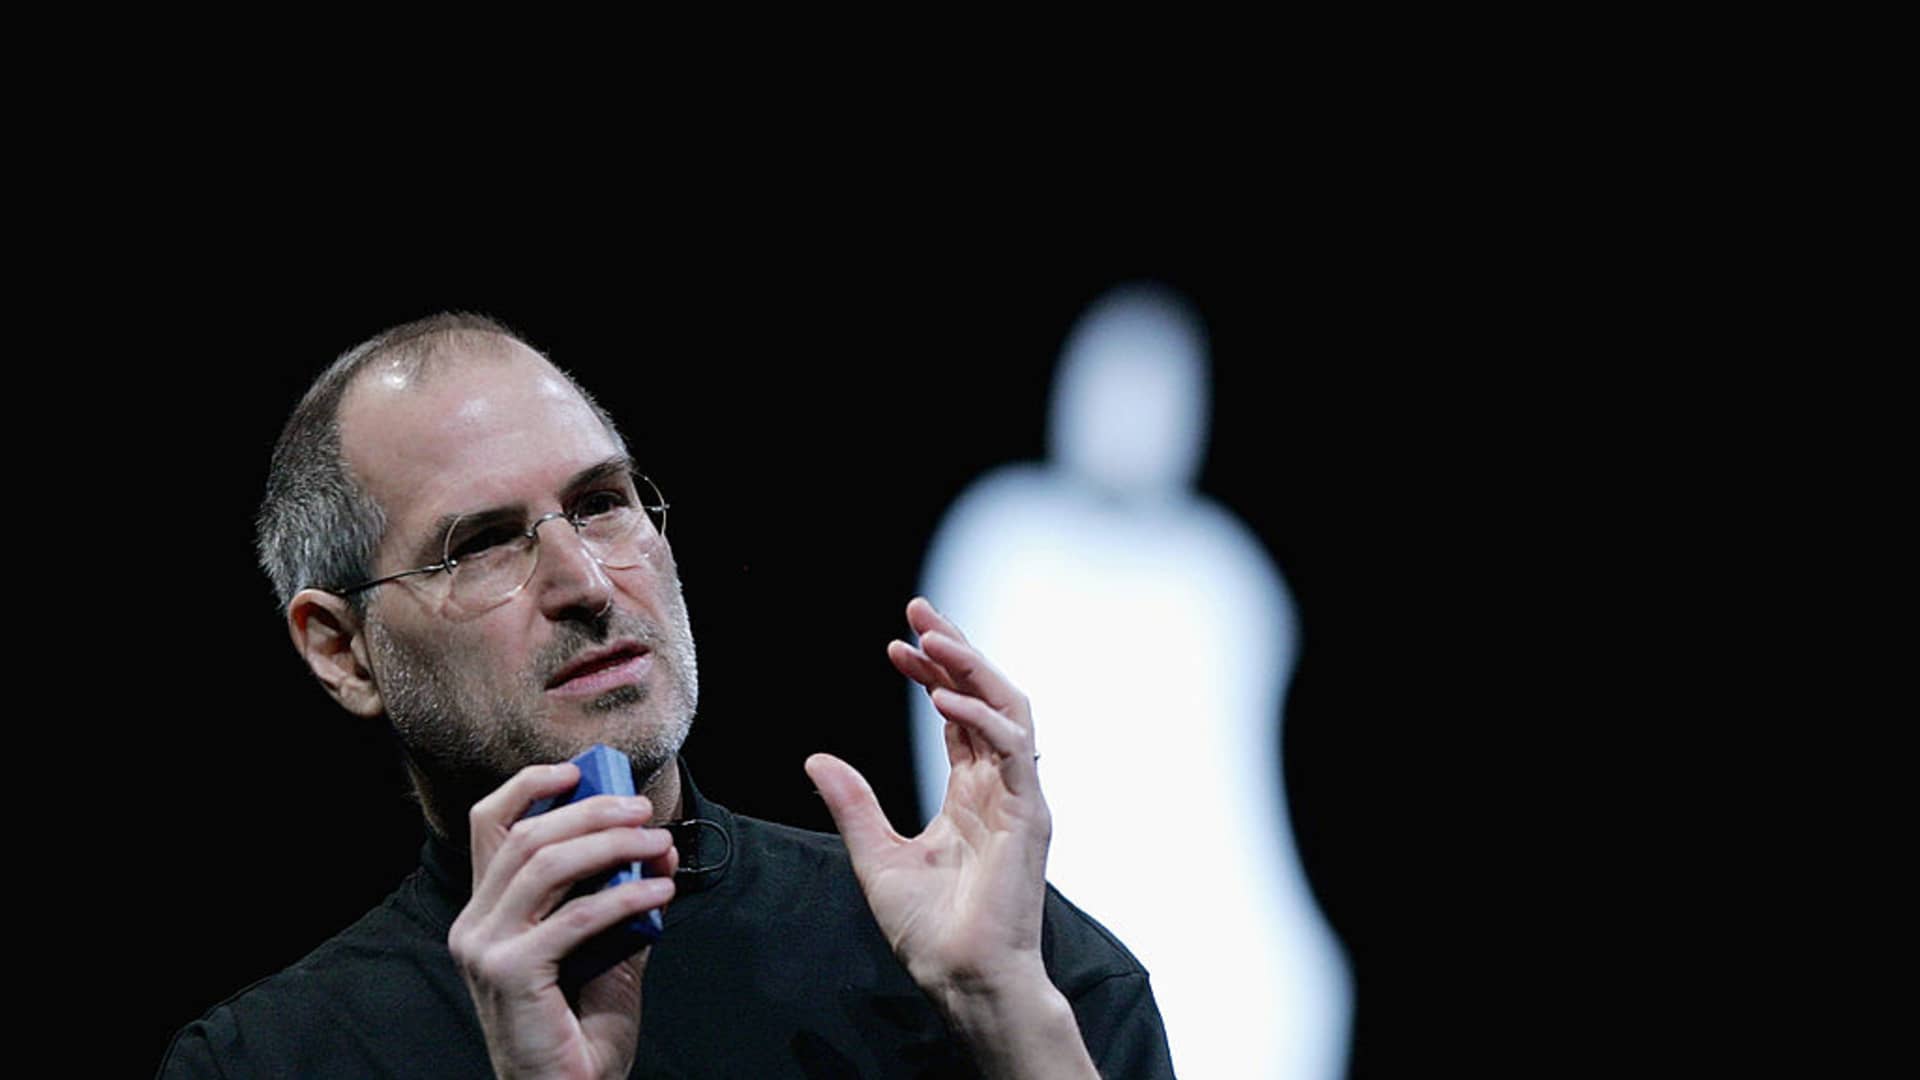 Steve Jobs' former assistant on what he did to be 'most productive'